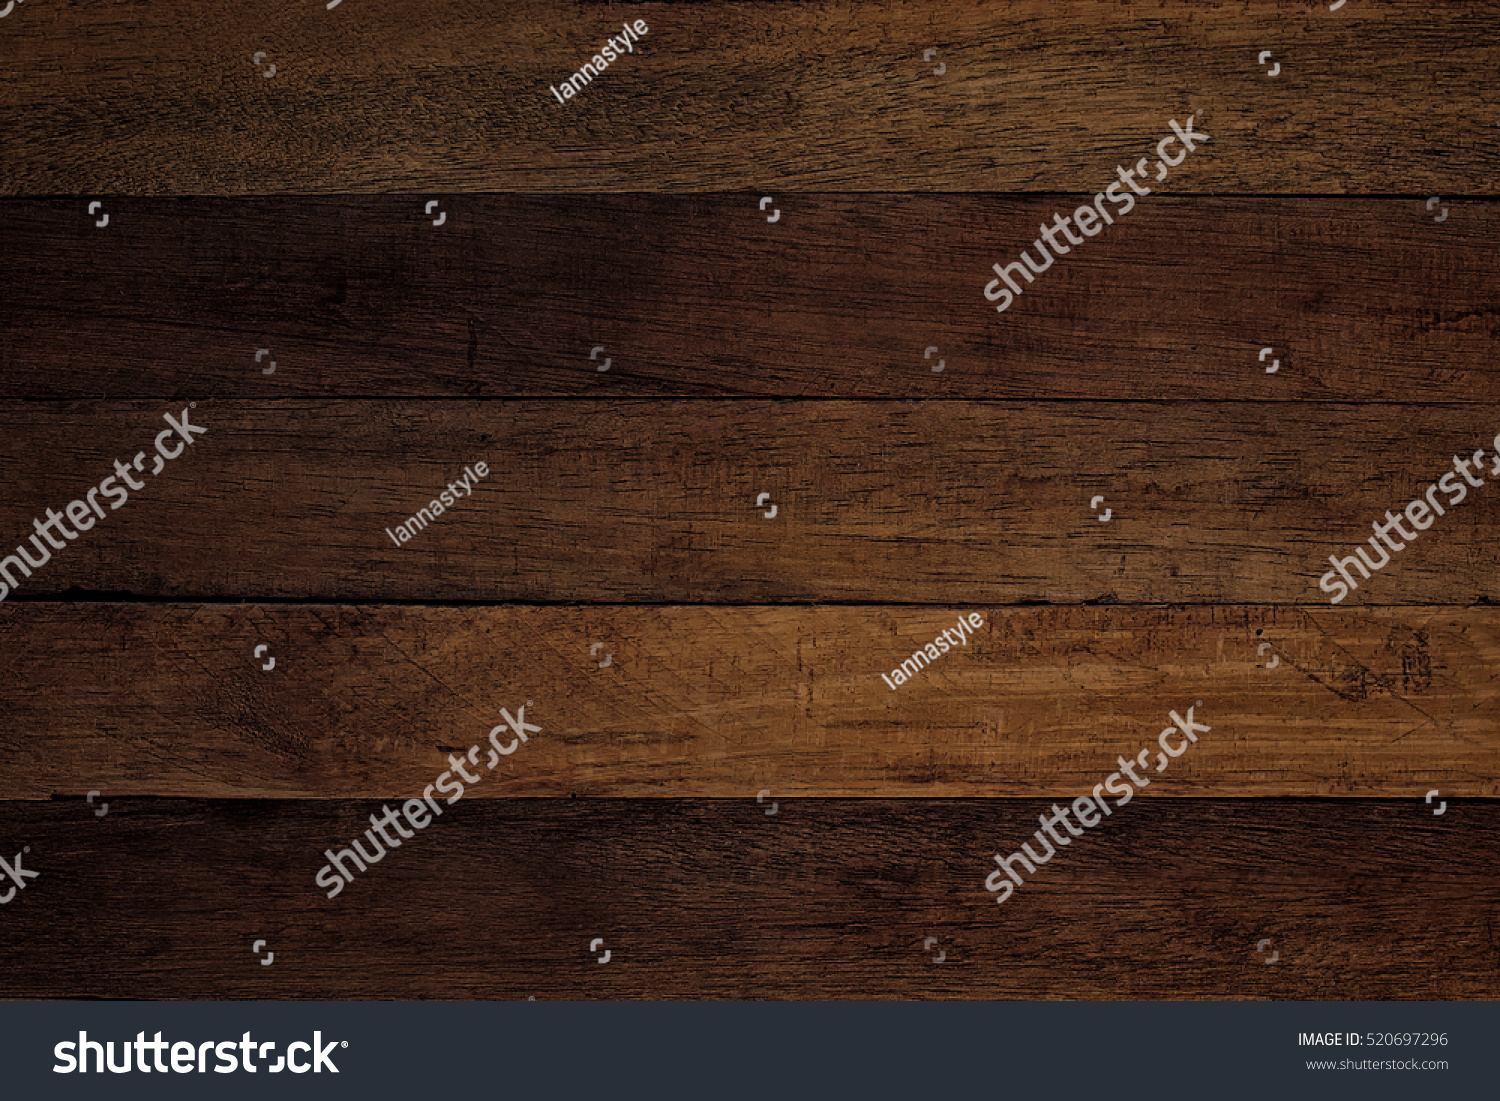 Wooden wall texture, wood background #520697296